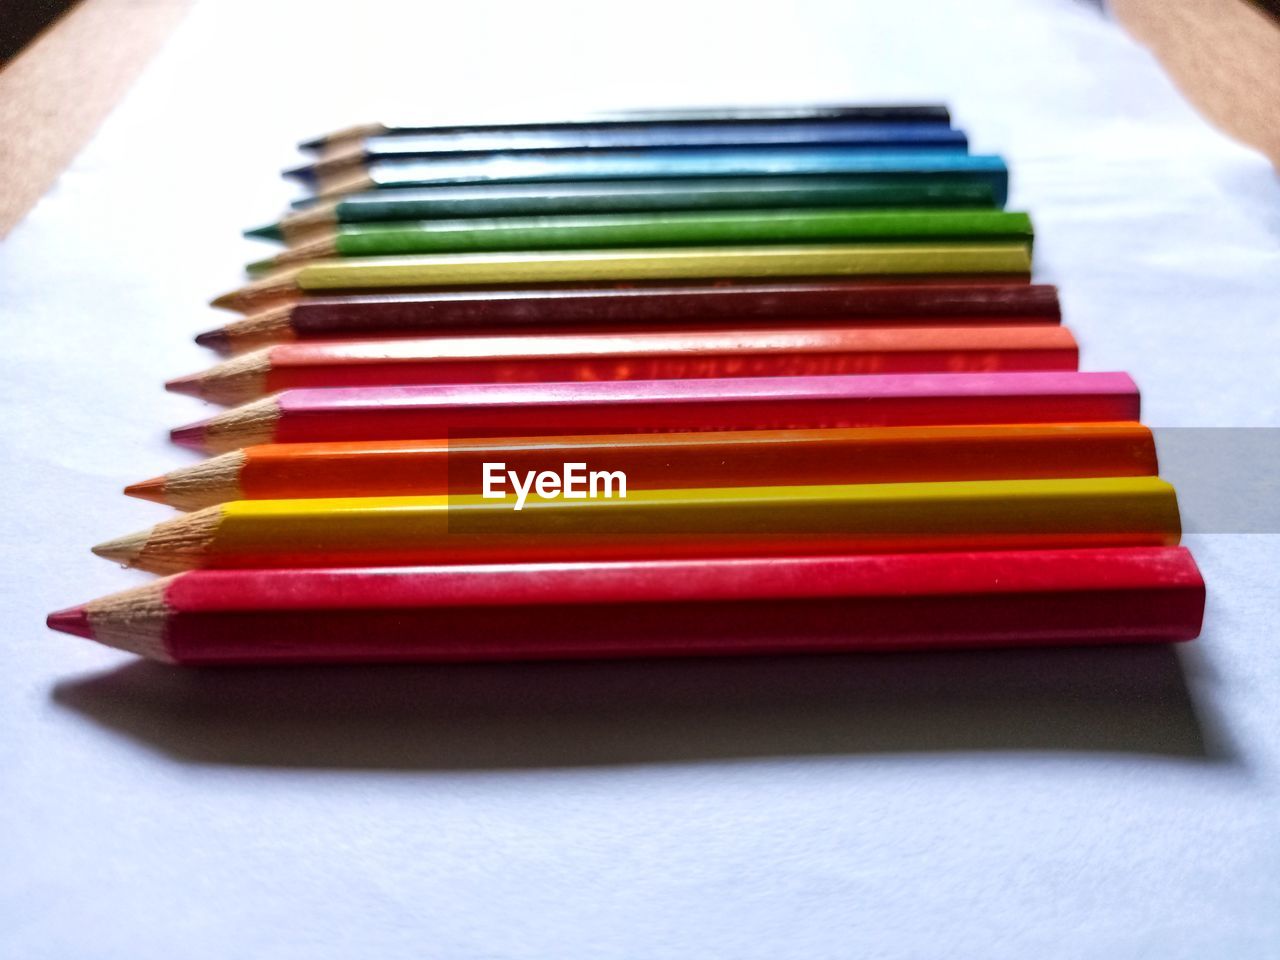 Colored pencils are visible from the right side